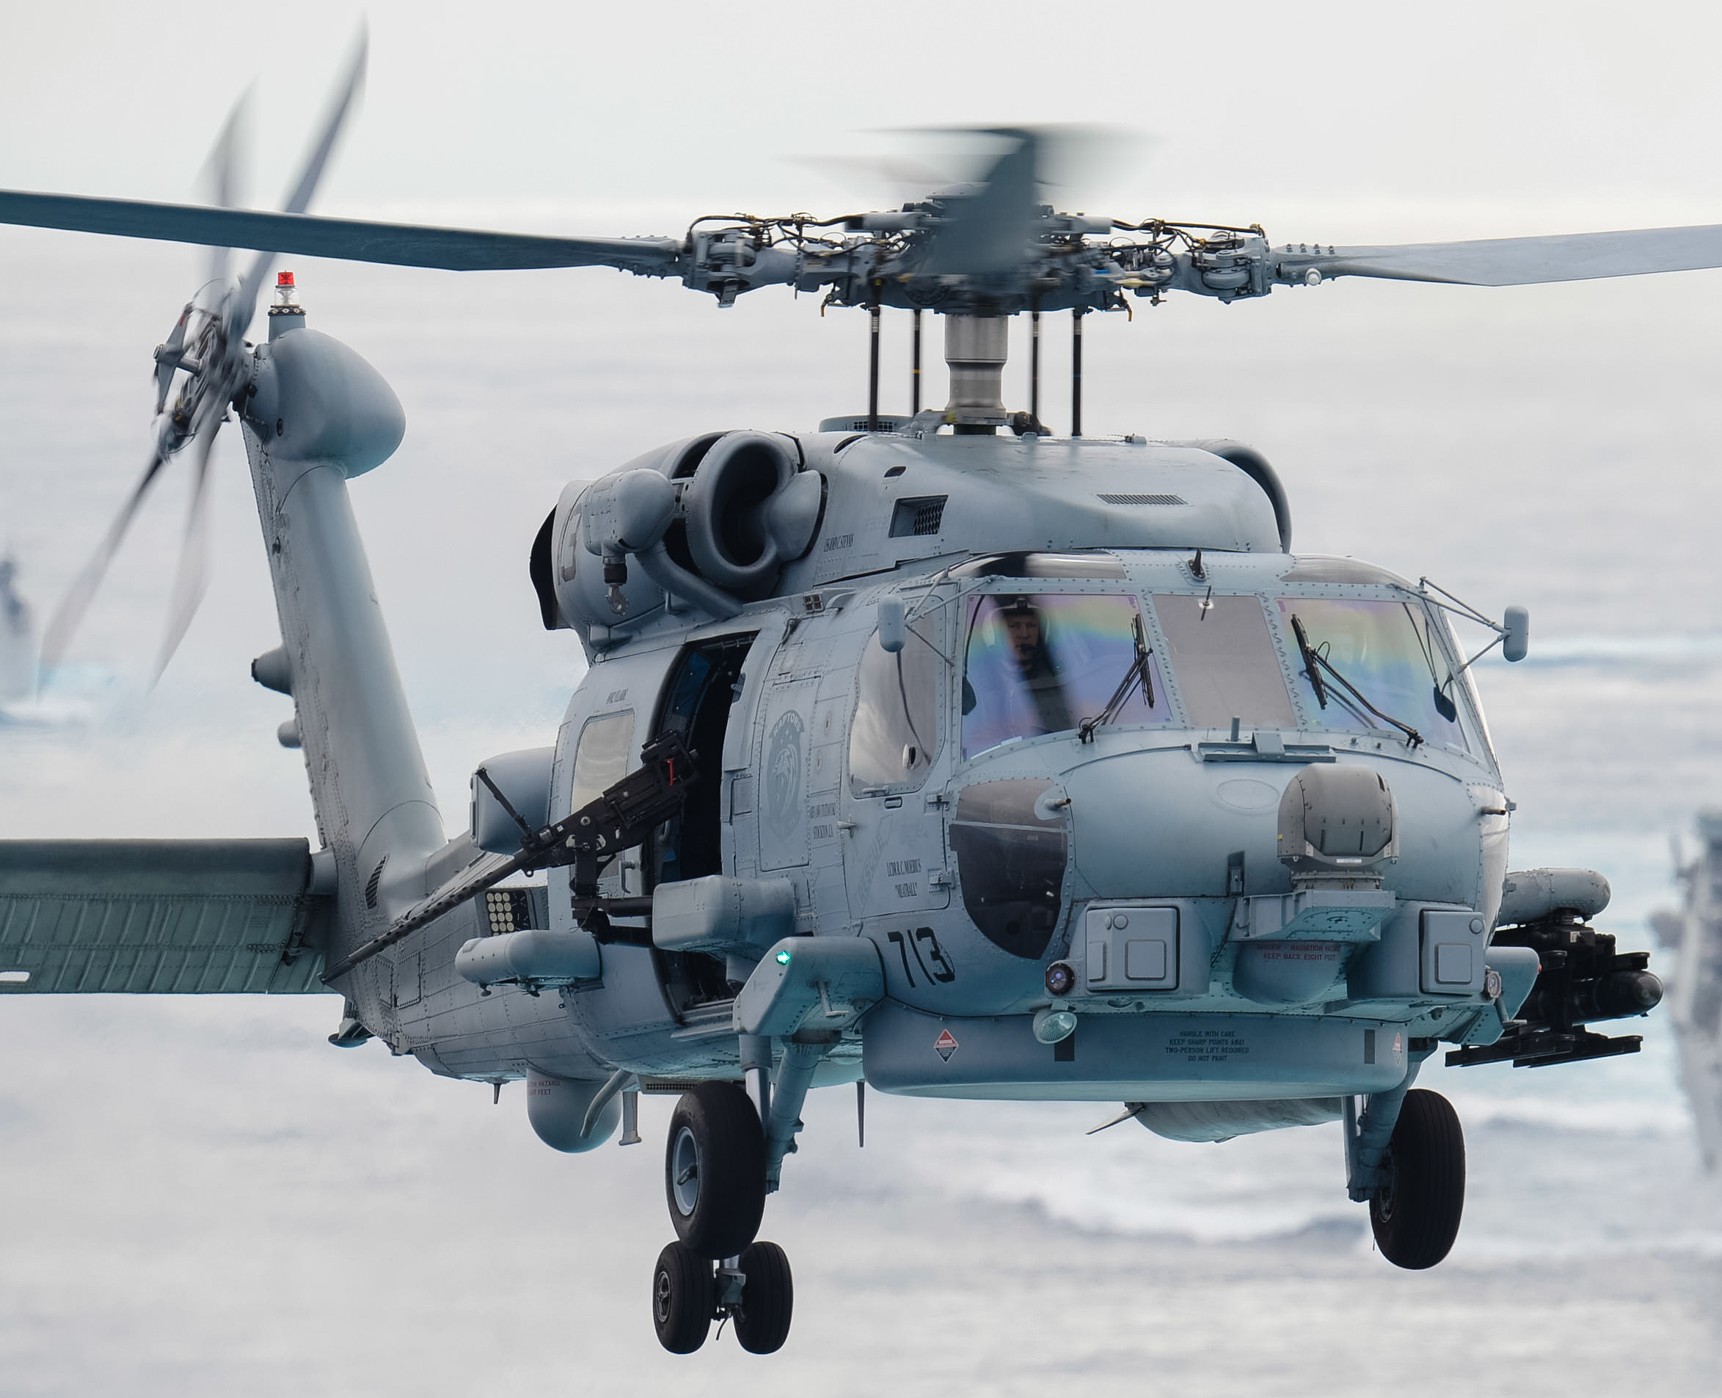 hsm-71 raptors helicopter maritime strike squadron mh-60r seahawk navy 2015 21